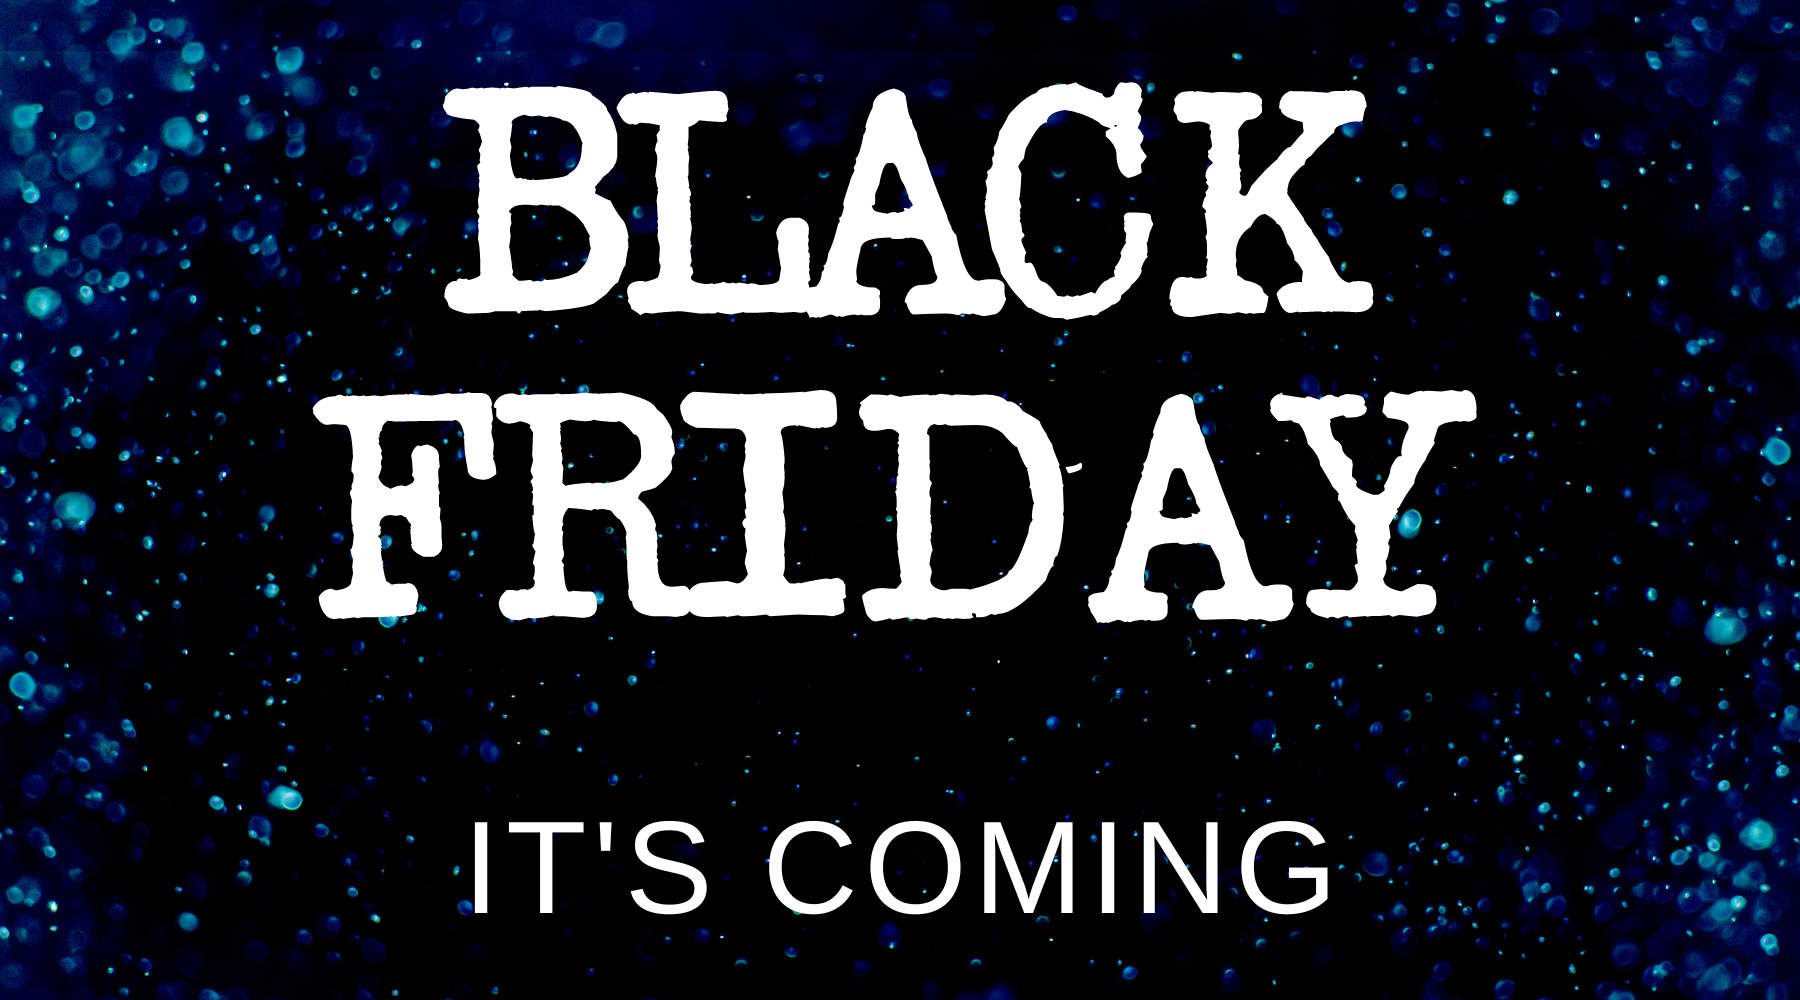 Black Friday is COMING!